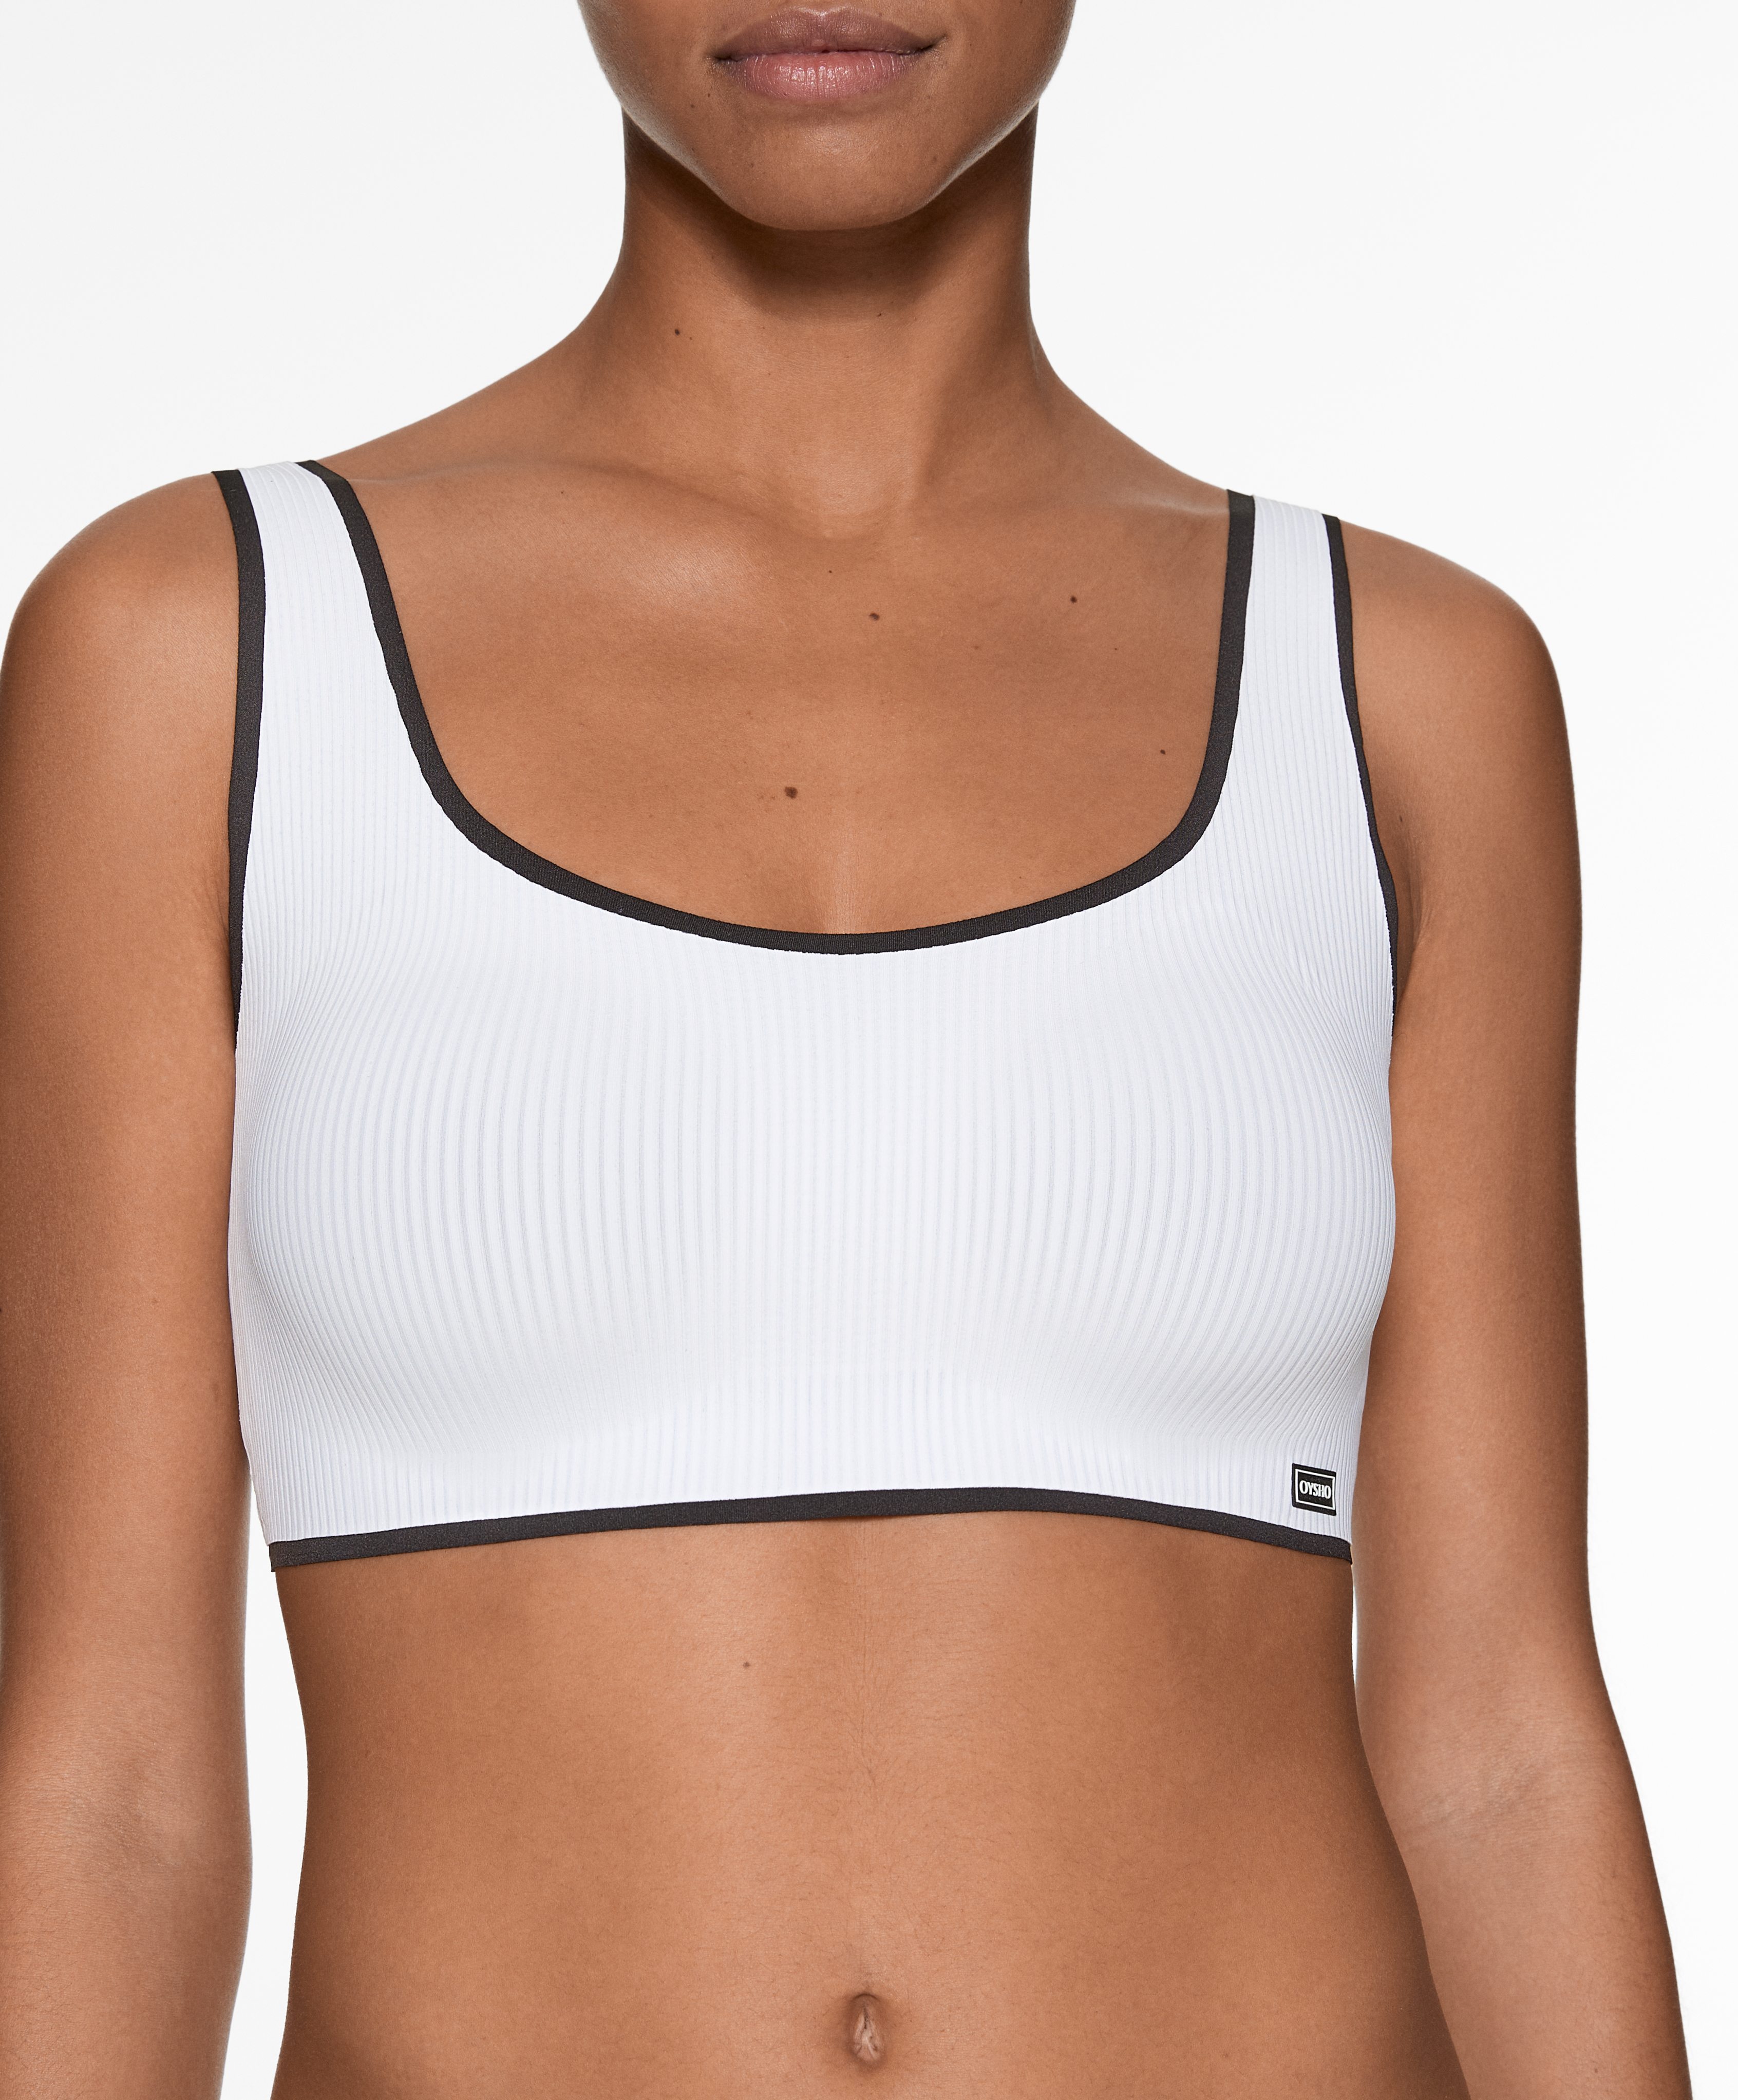 Invisible bra top with piping